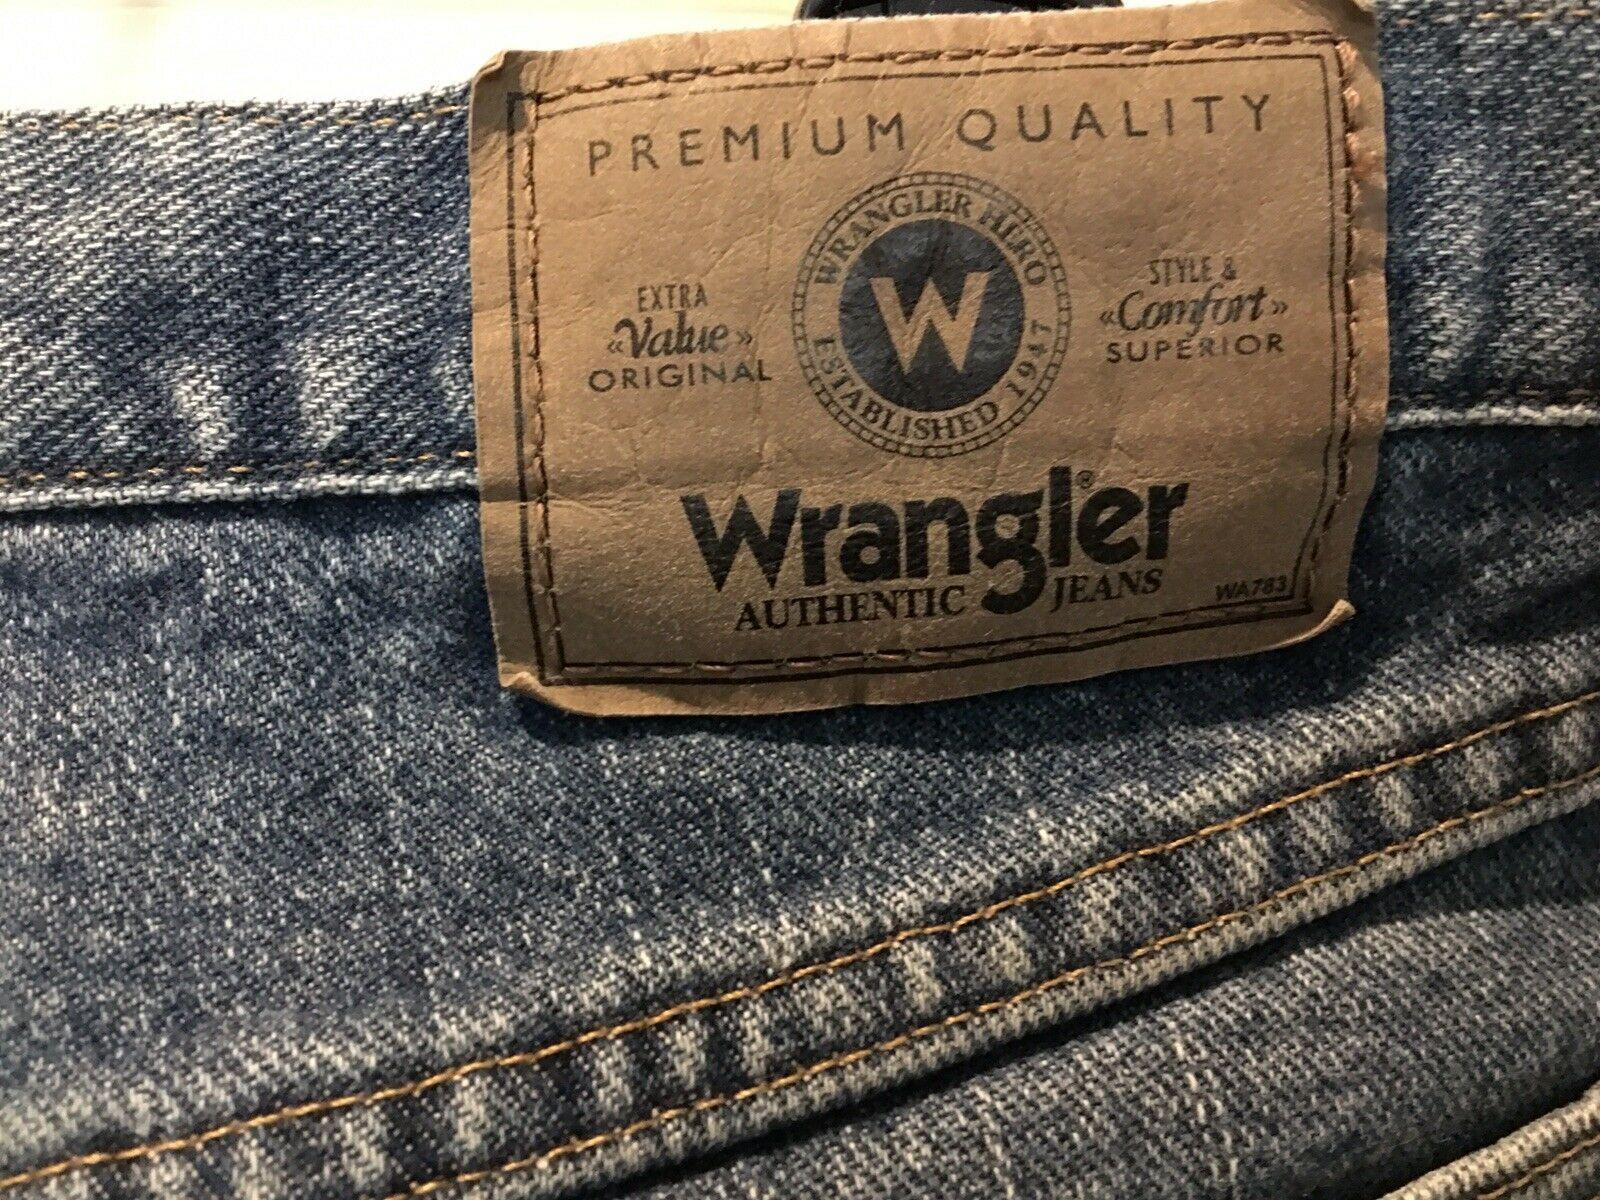 Wrangler Jeans Wallpapers - Top Free Wrangler Jeans Backgrounds ...